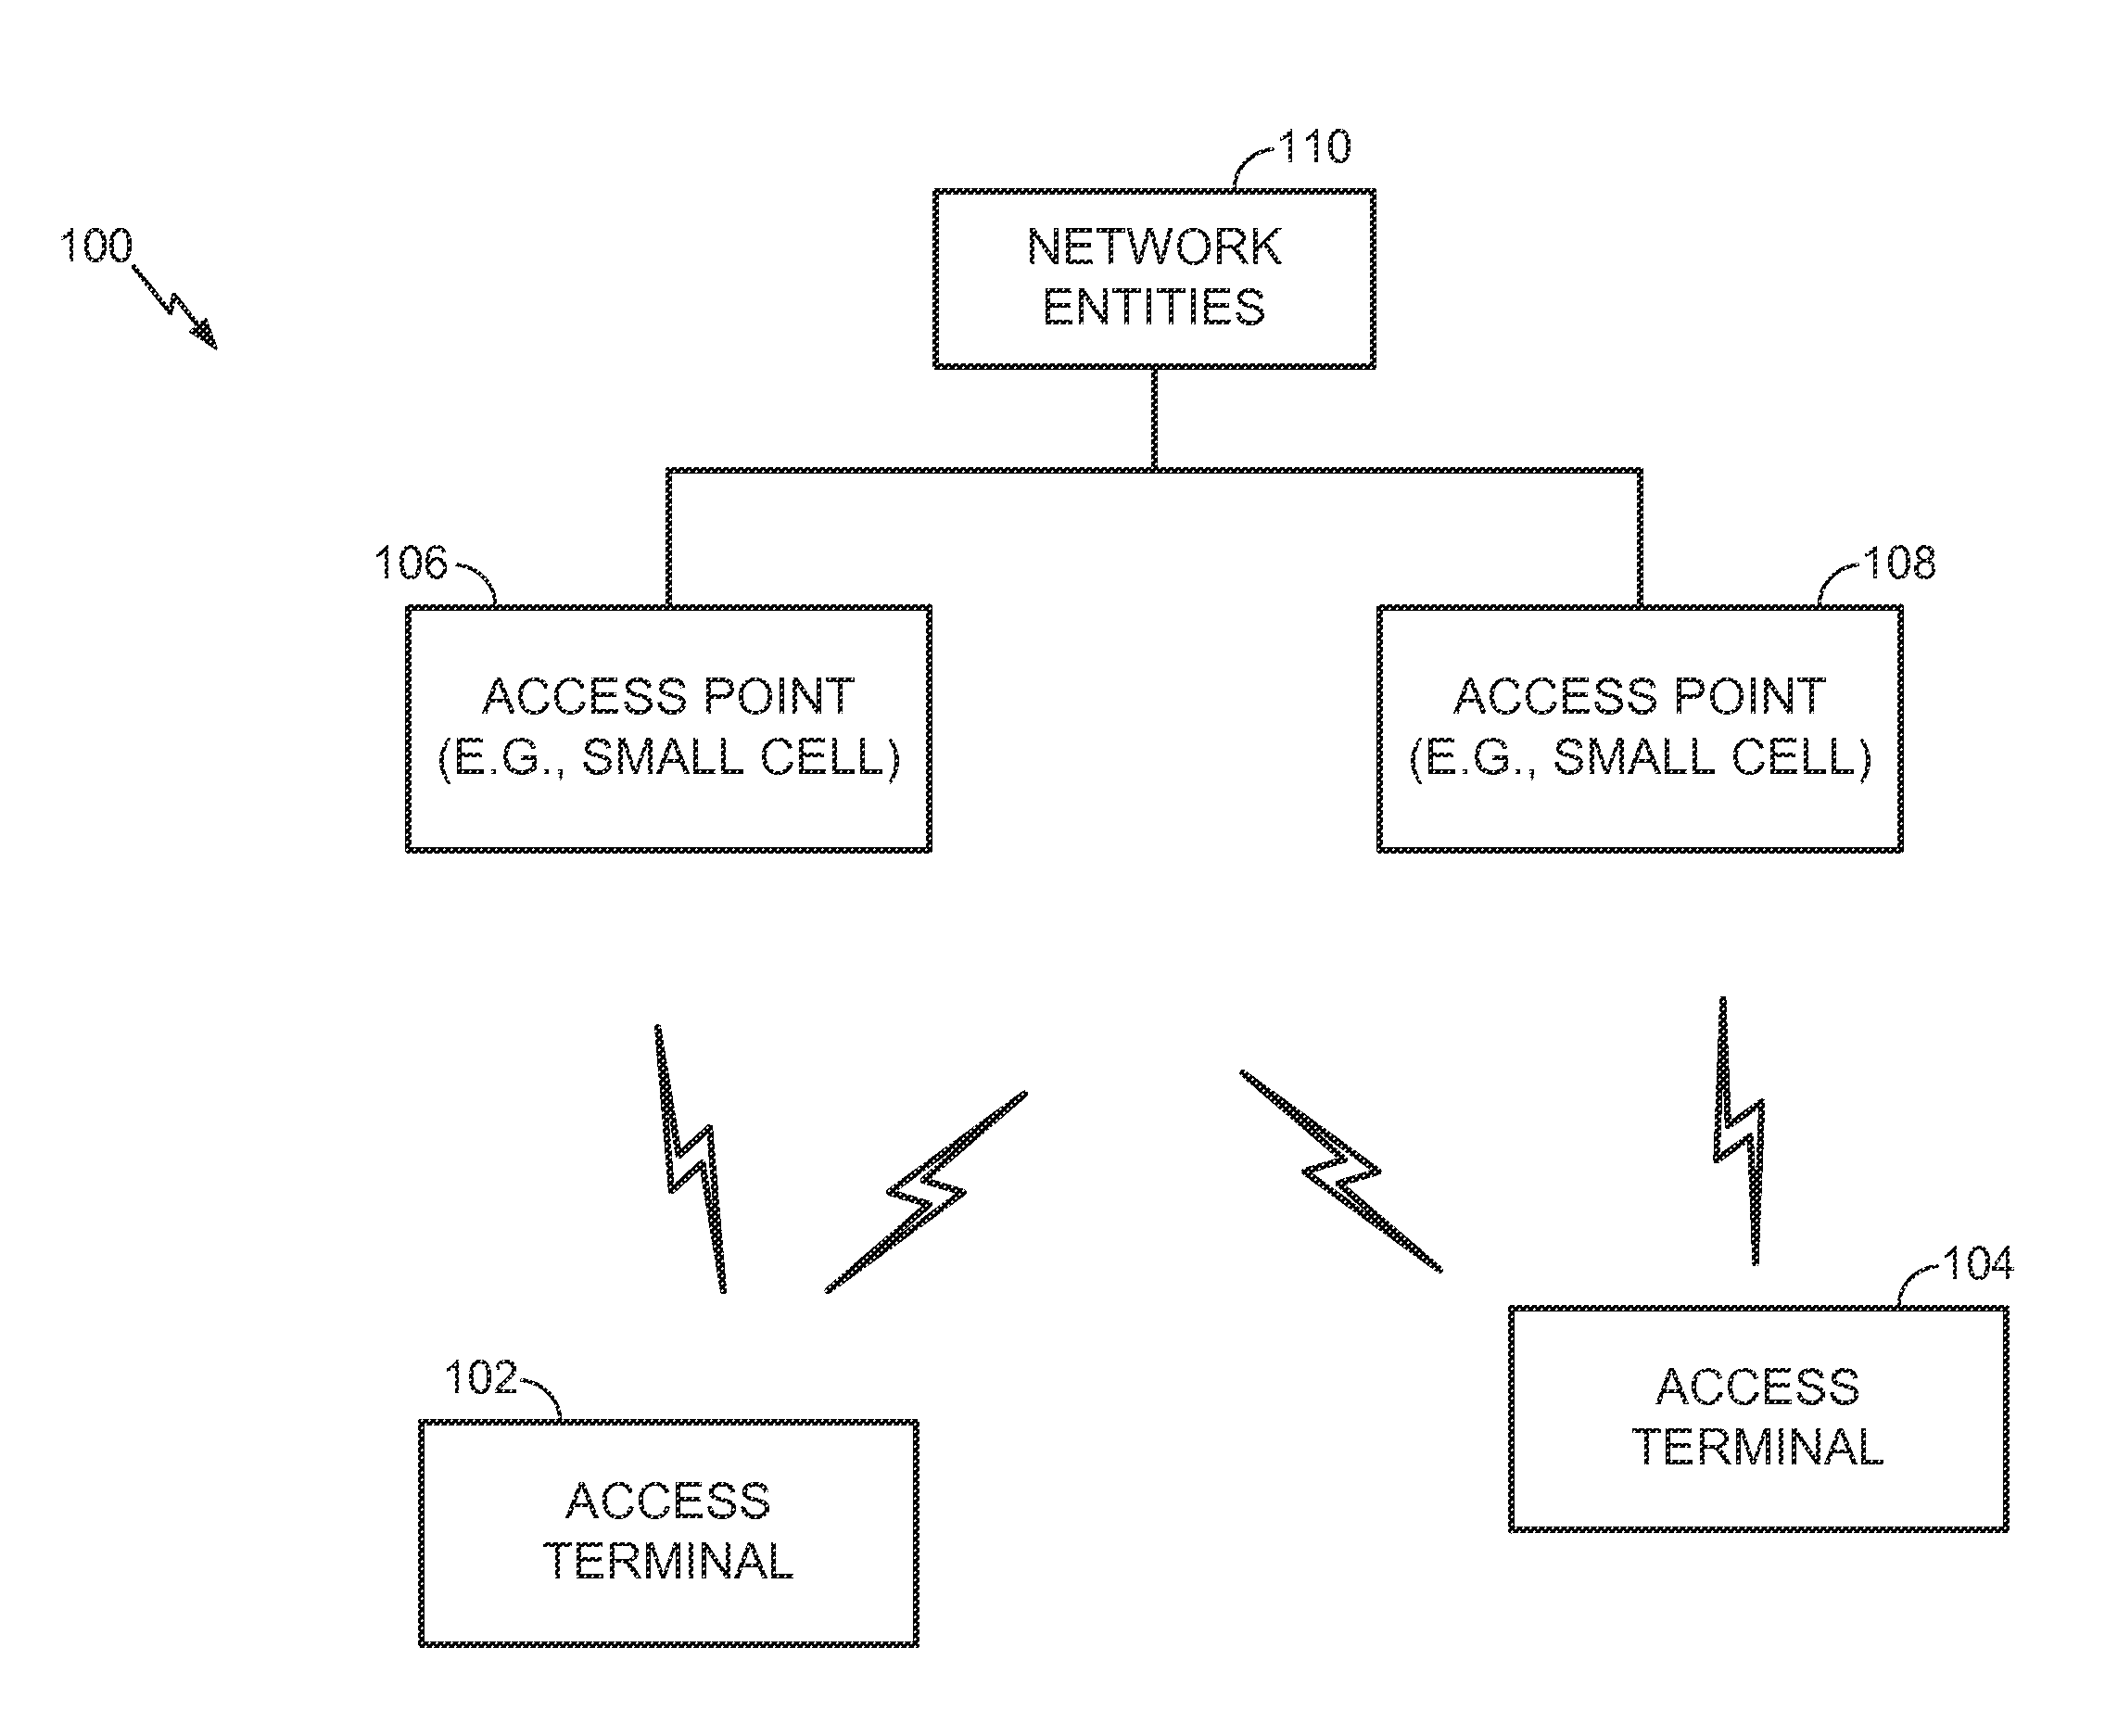 Scheduling based on signal quality measurements